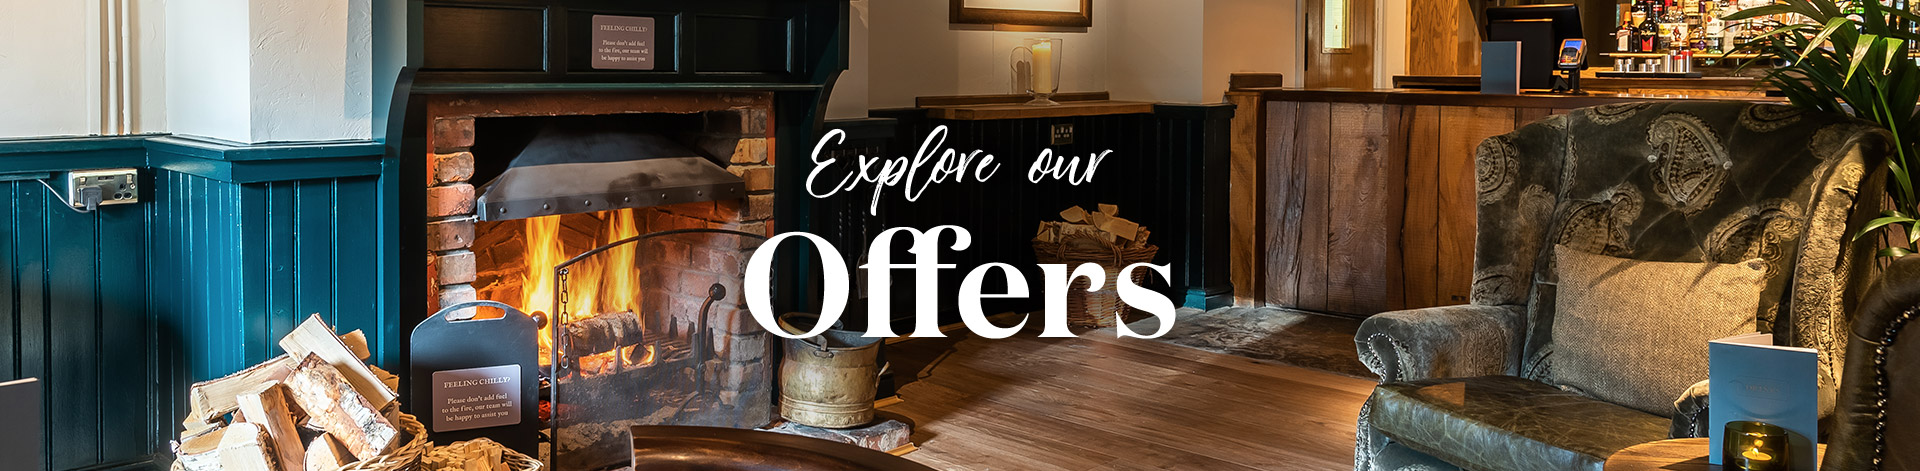 Our latest offers at The Chequers